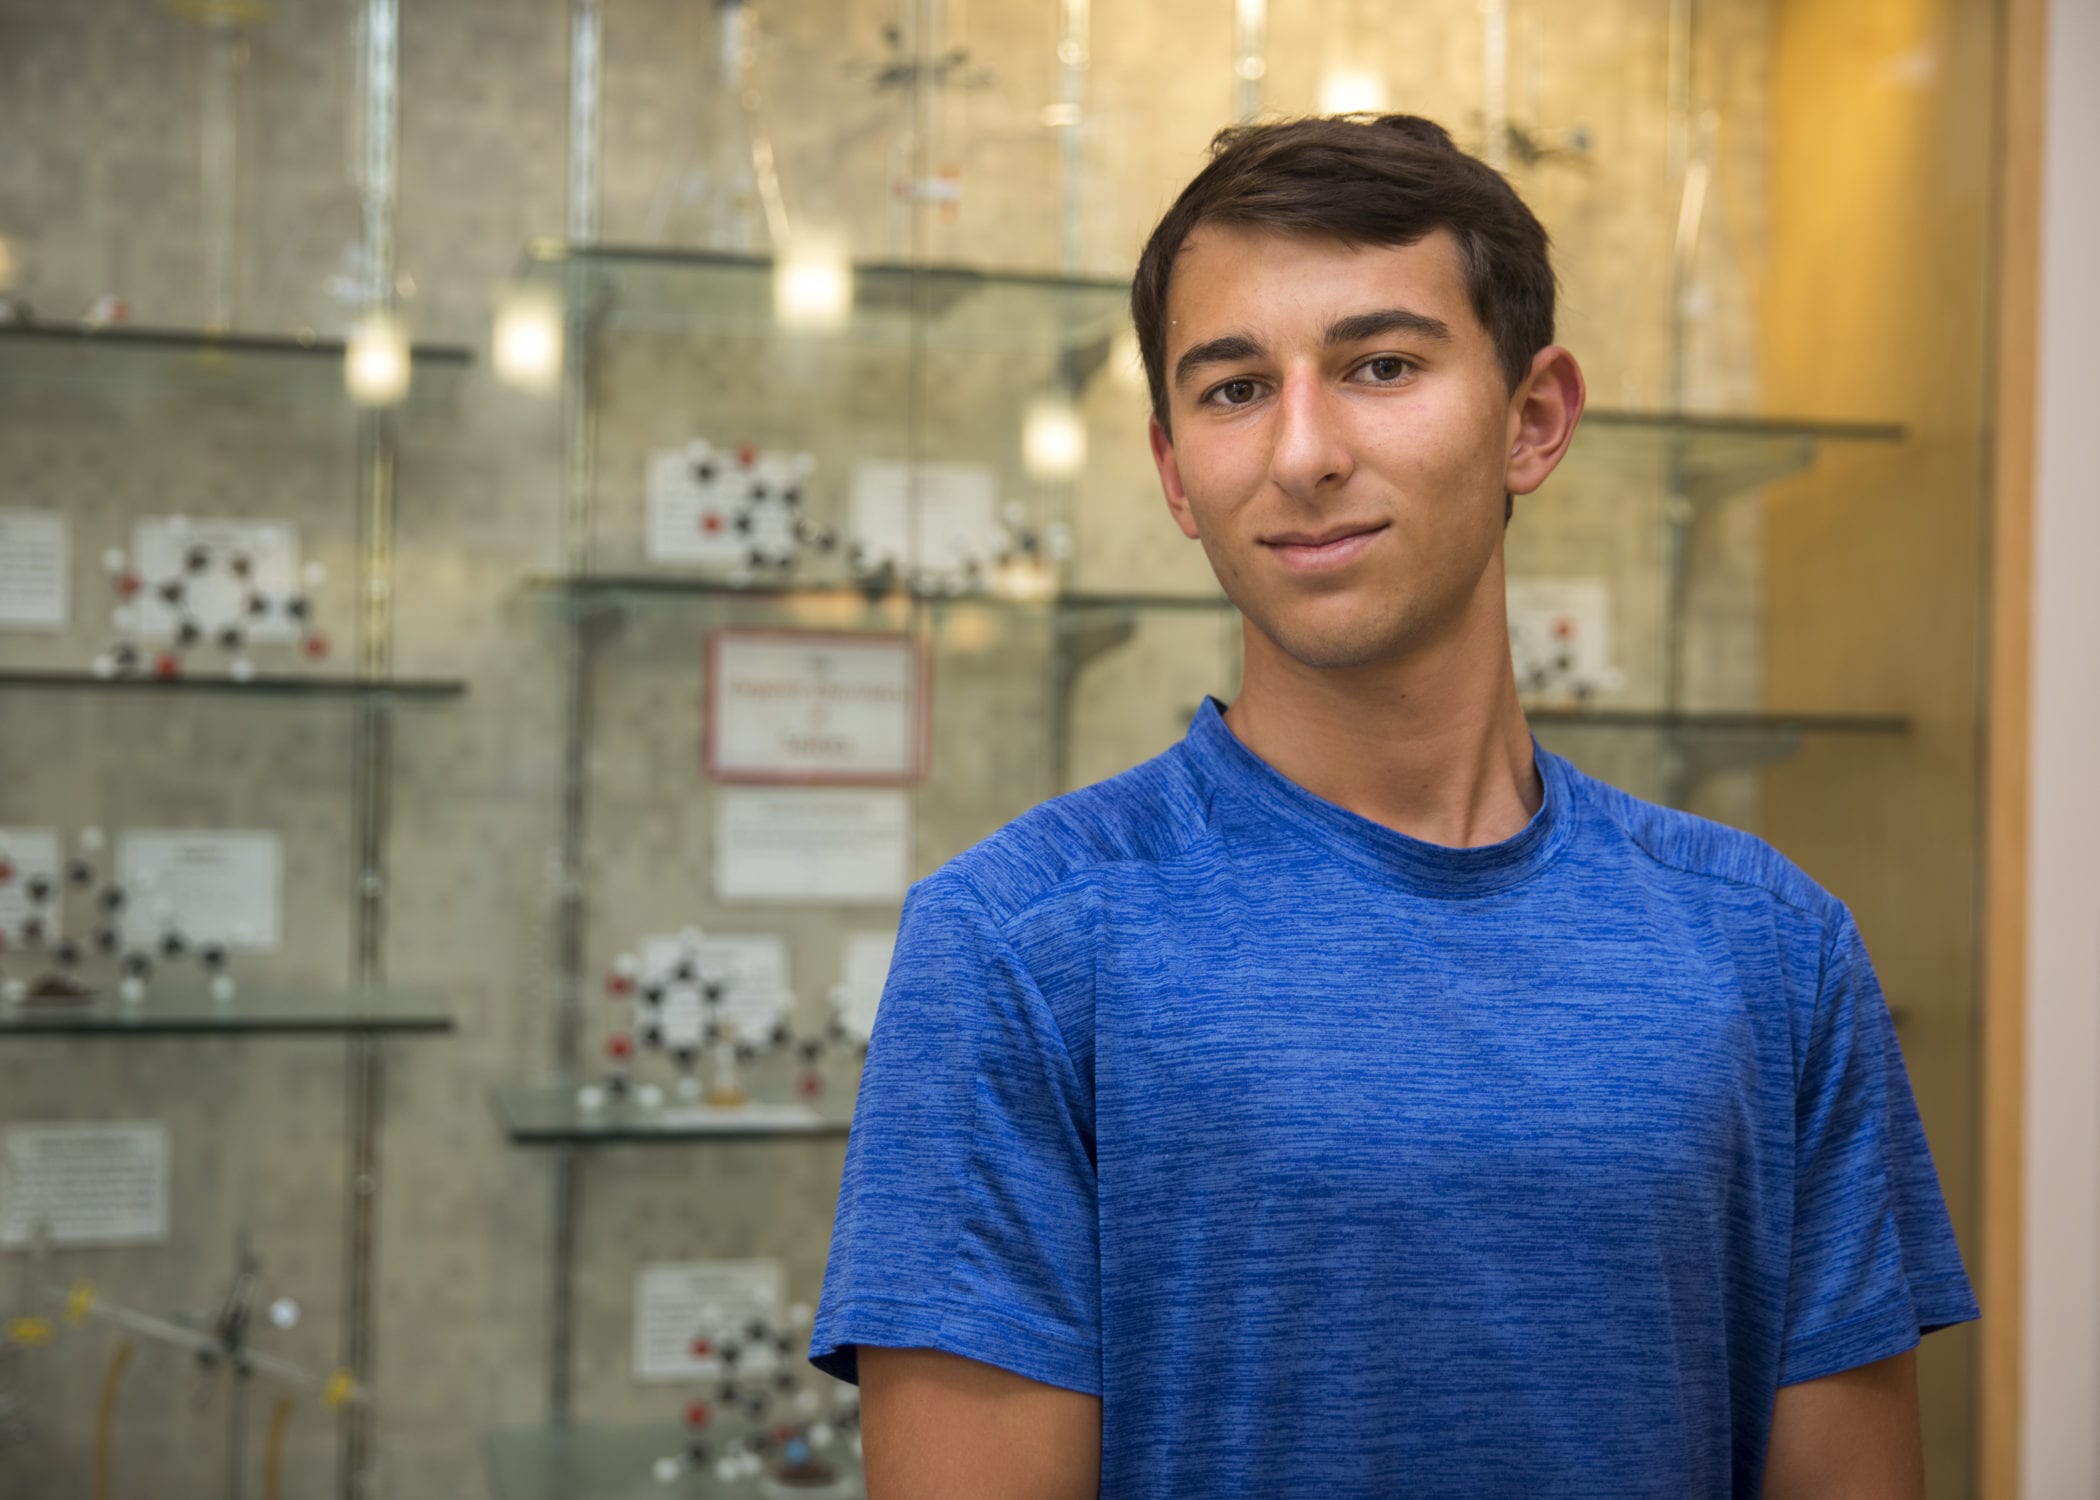 Stay home, go far: Alex gets a head start on his future in biomedical engineering